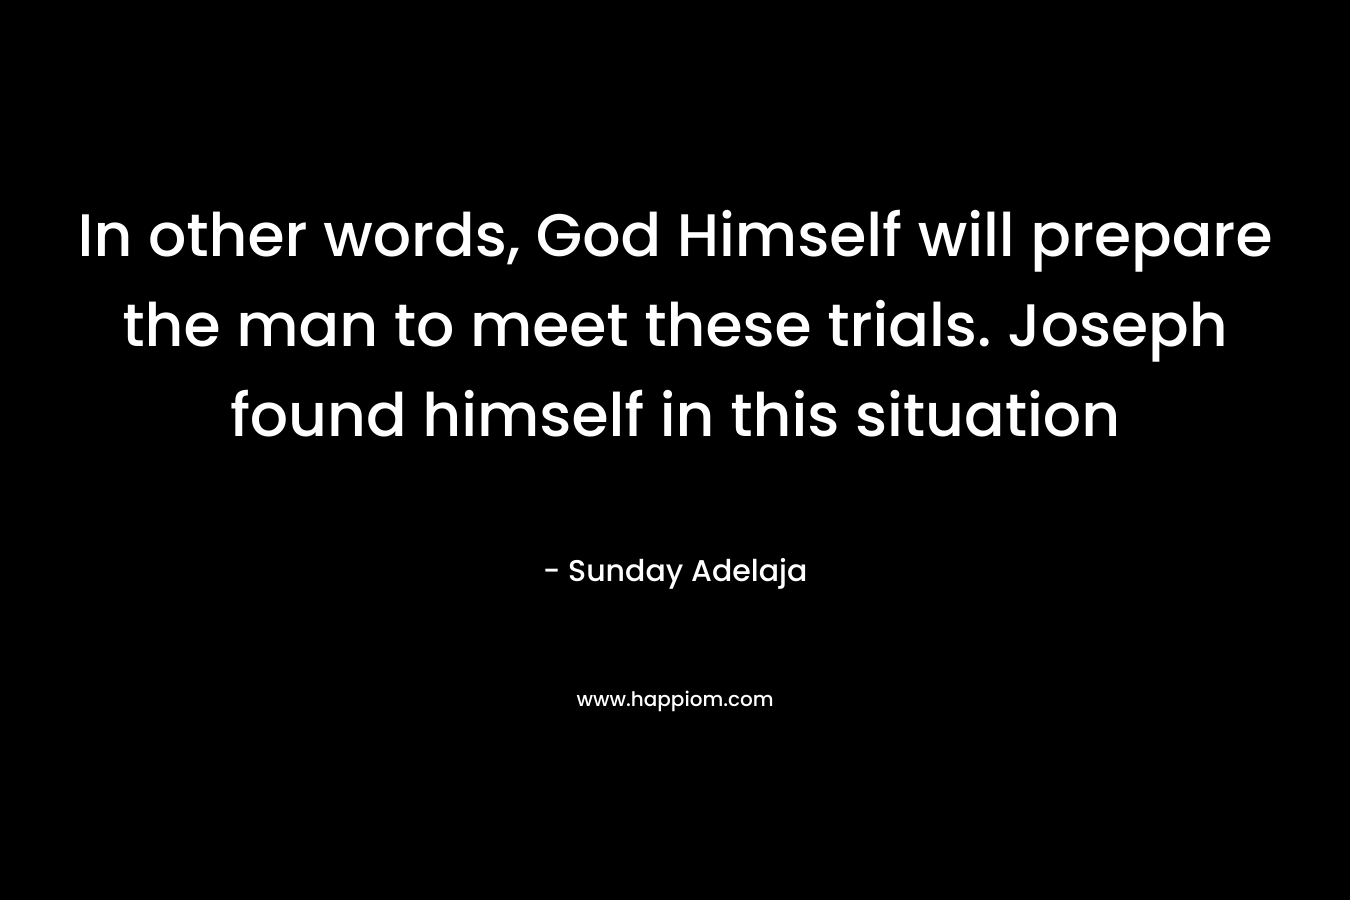 In other words, God Himself will prepare the man to meet these trials. Joseph found himself in this situation